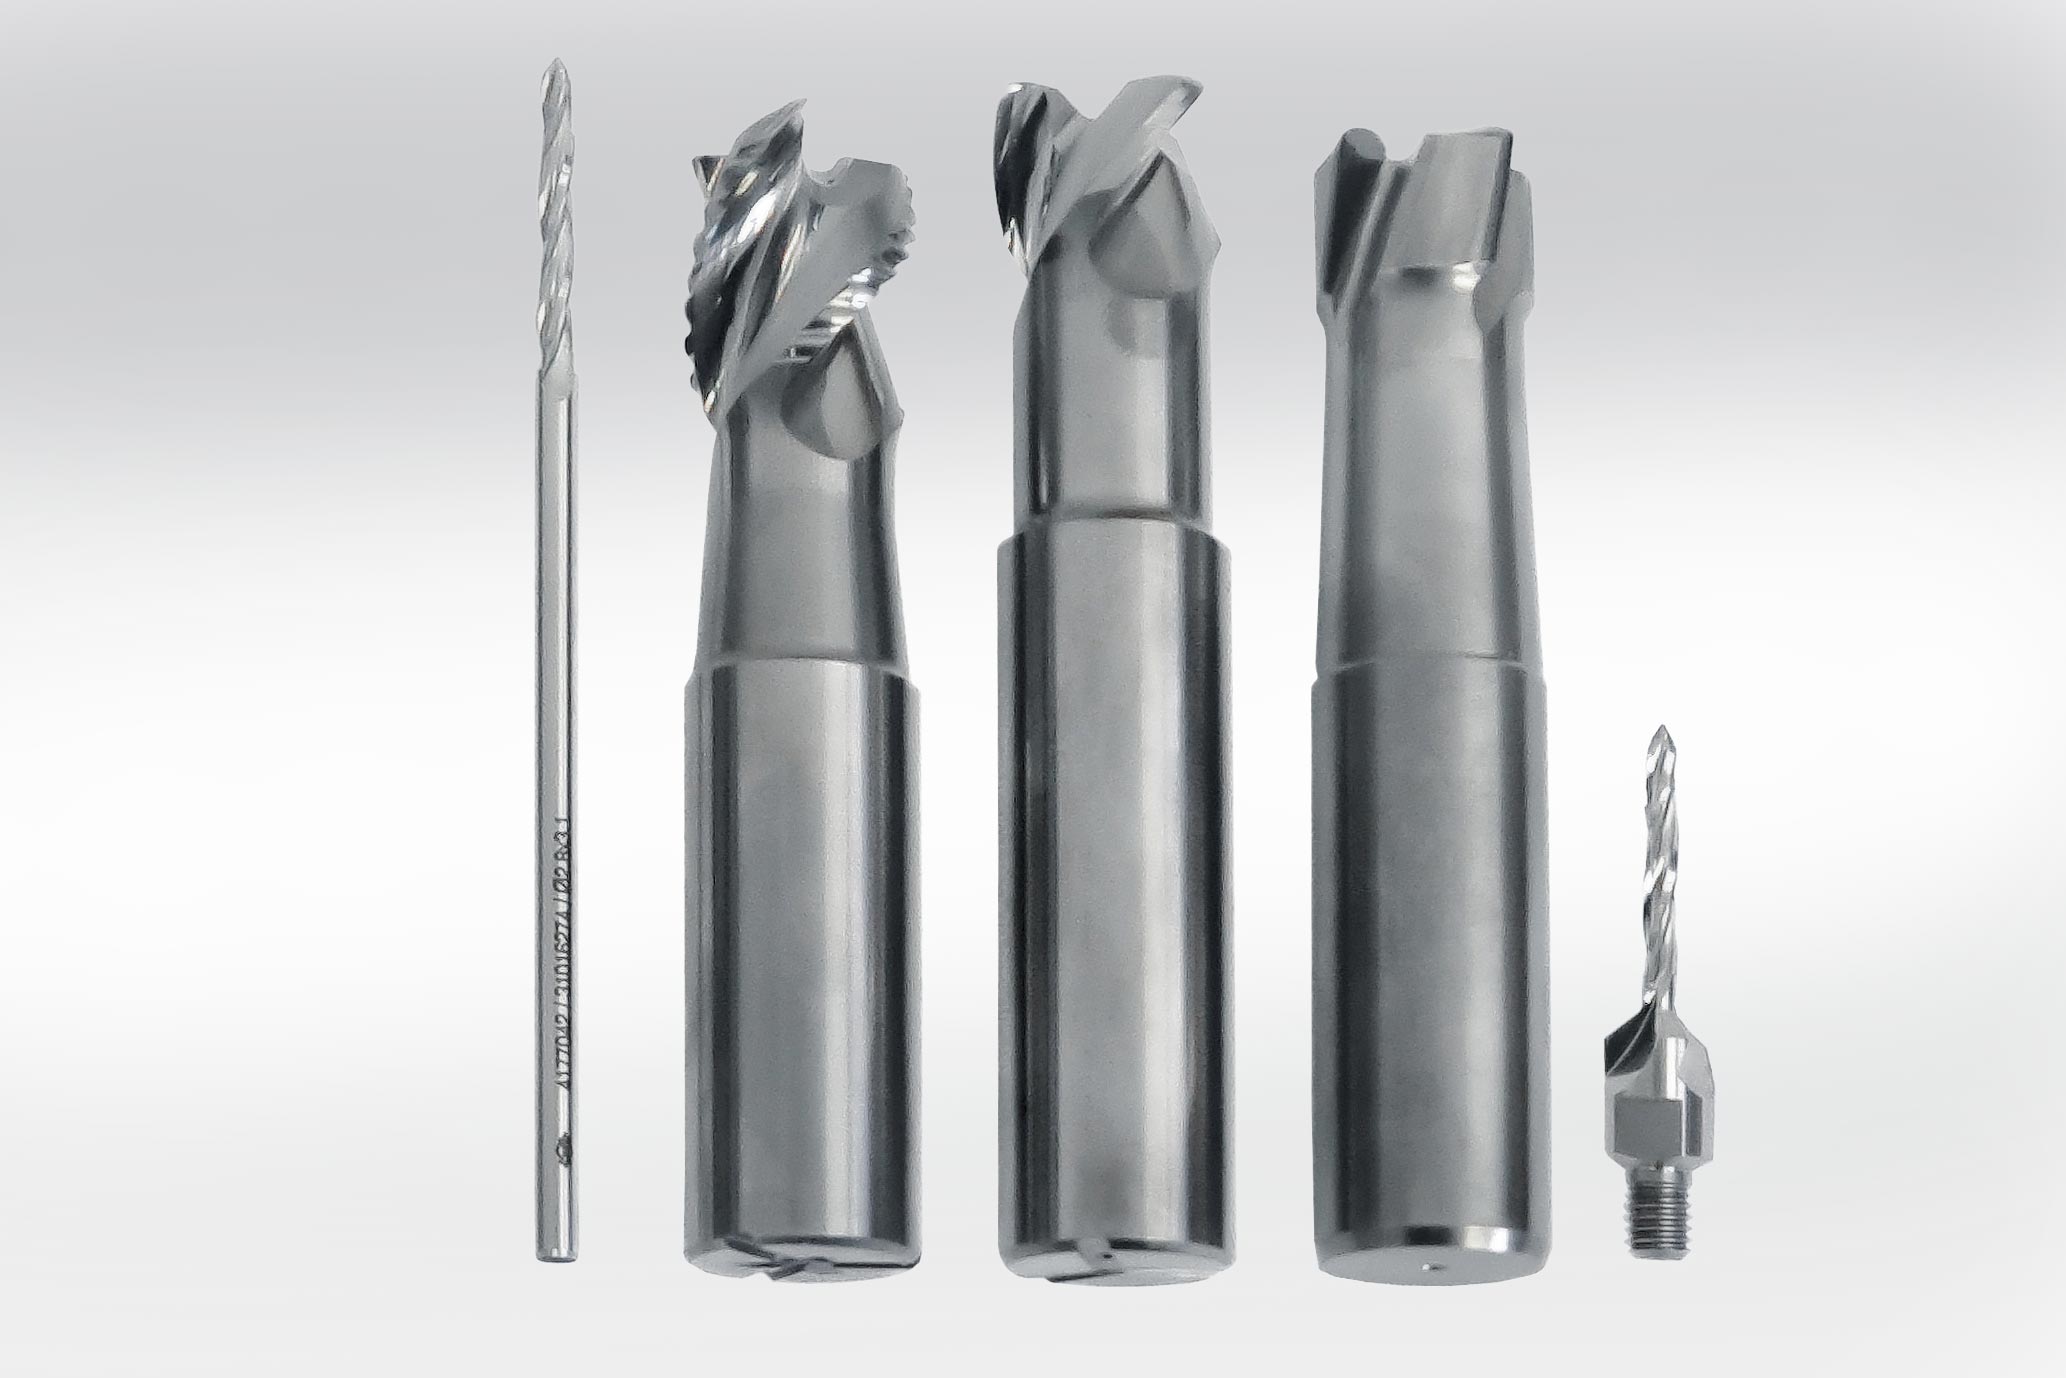 There are five tools in the row: Reamer, 2 milling cutters, PCD high-feed milling cutter, combination tool for drilling/countersinking. 